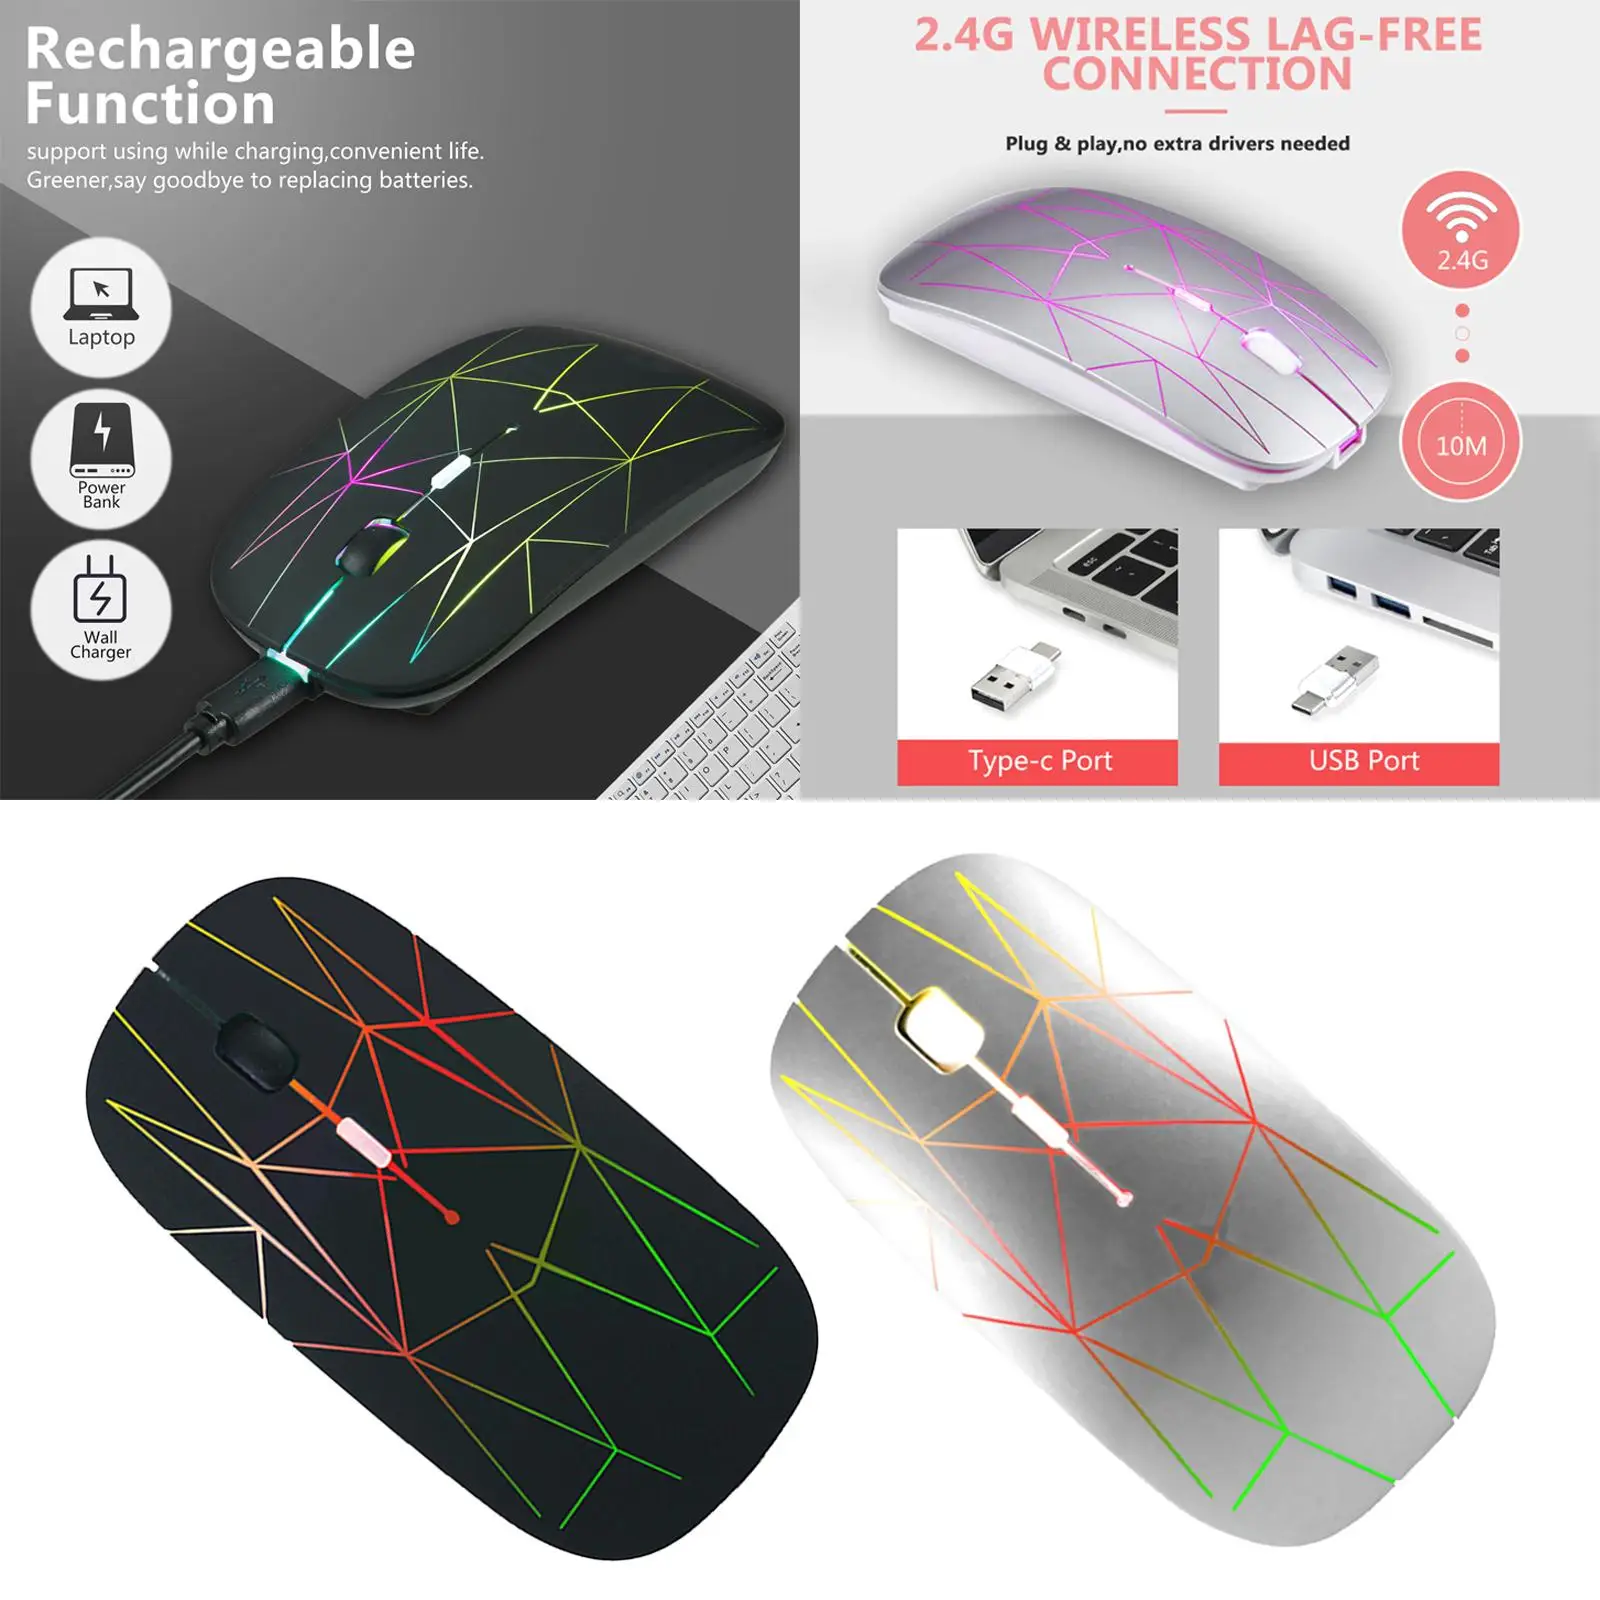 Slim LED Wireless Mouse Rechargeable Adjustable DPI LED Breathing Lights Mobile Optical Mouse Silent 4 Buttons for Laptop Office